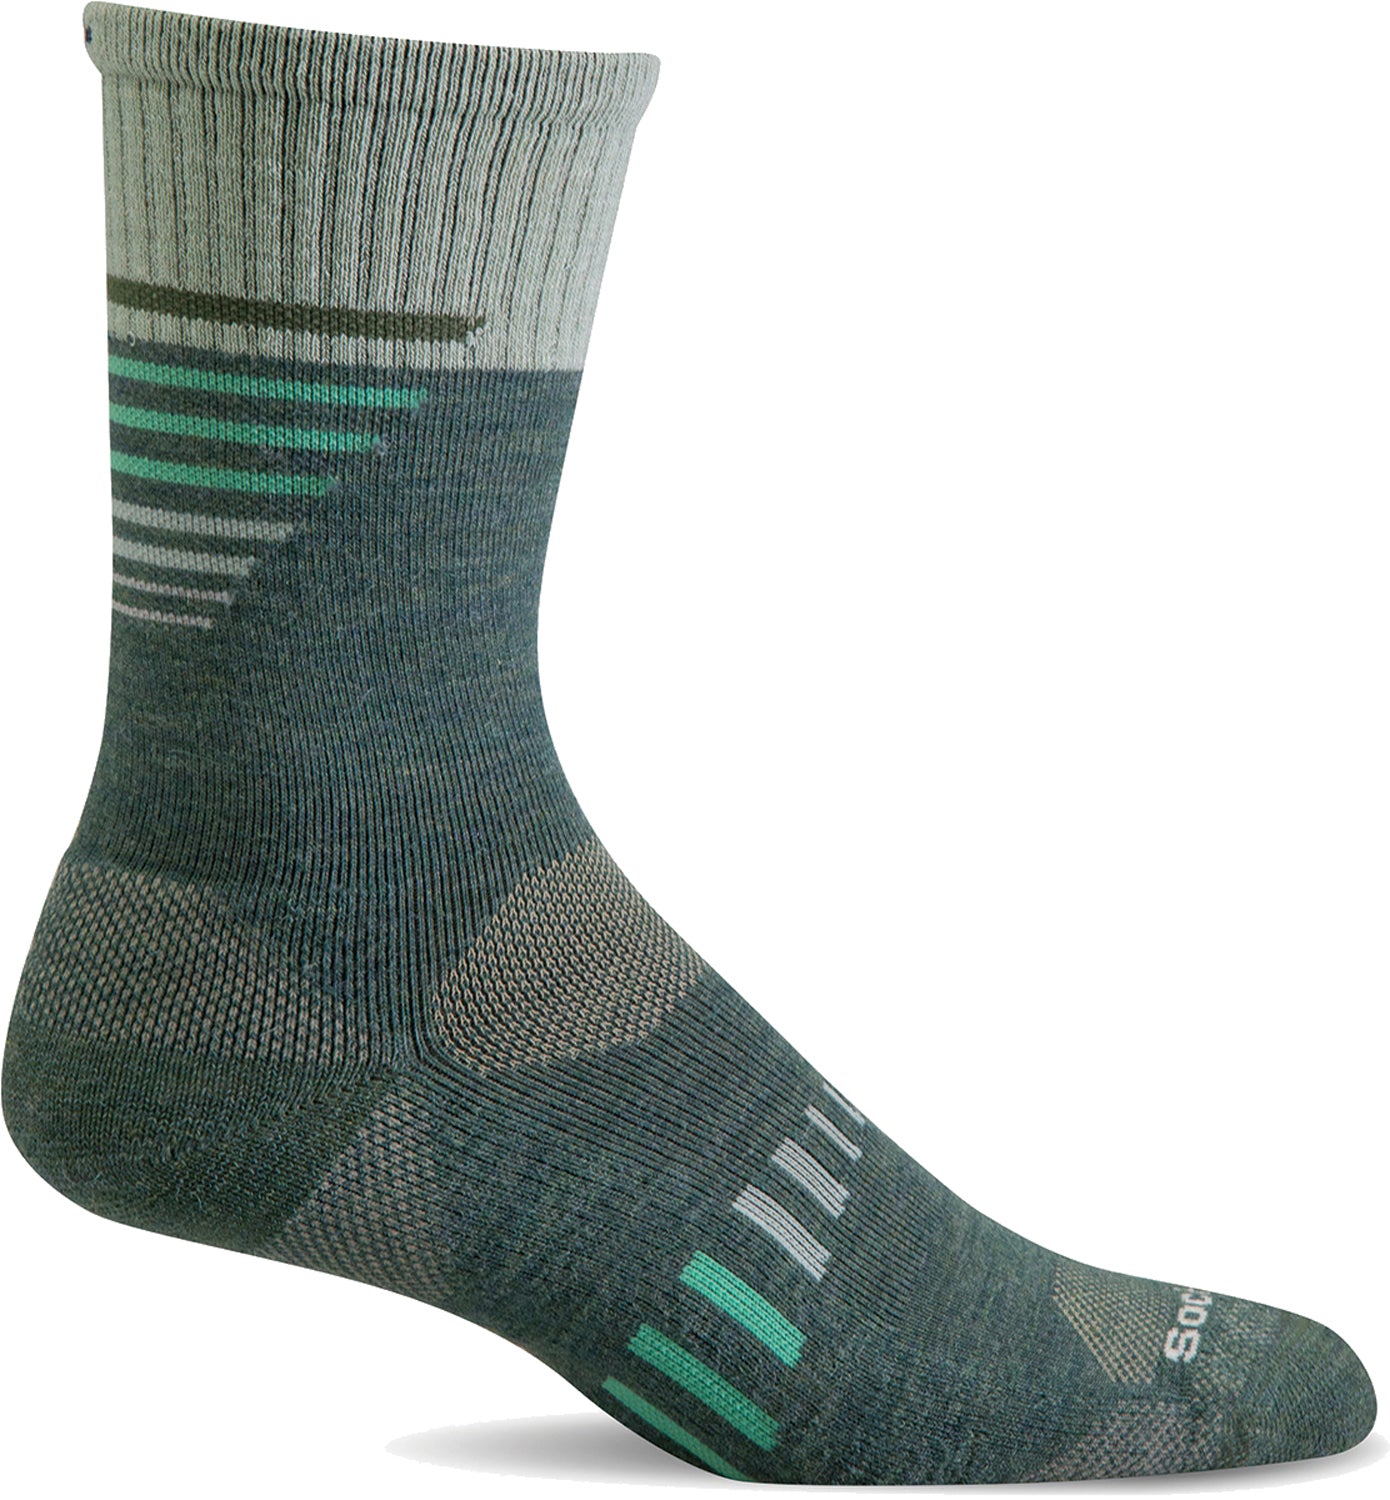 Sockwell Women's Ascend II Crew Moderate Graduated Compression Sock in Woodland color from the side